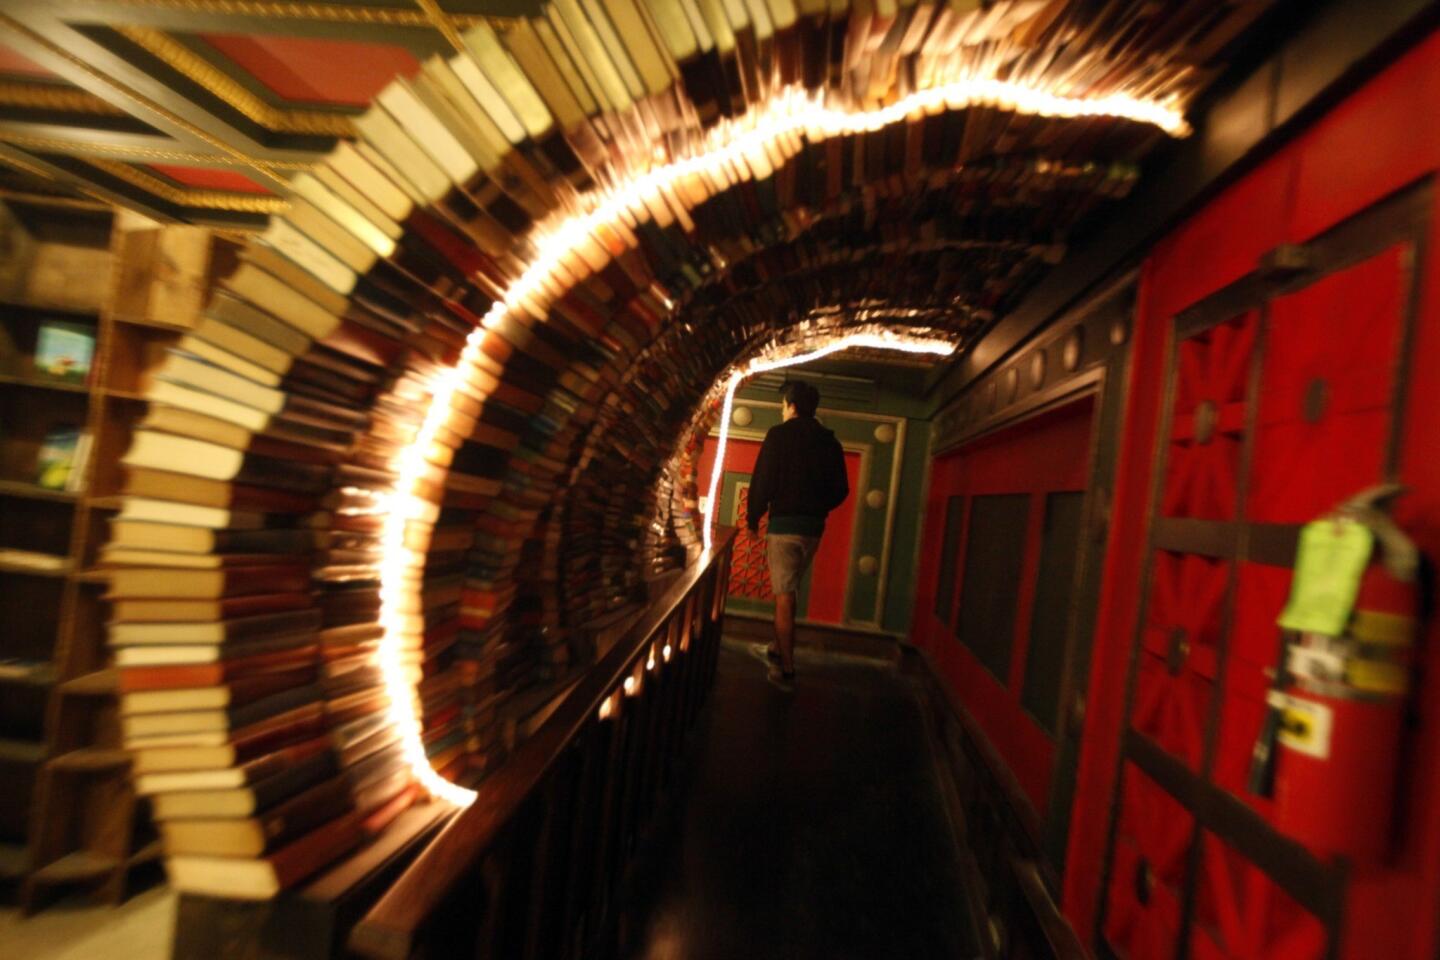 A visitor walks through a tunnel of books in the Labyrinth on the second floor of the Last Bookstore in downtown Los Angeles. The Labyrinth features a massive, chaotic, maze-like space housing more than 100,000 used books, all at $1 each. It features doors that lead nowhere, time-travel portholes looking into an artist's rendition of outer space, and "secret passage ways" leading into hidden book rooms.